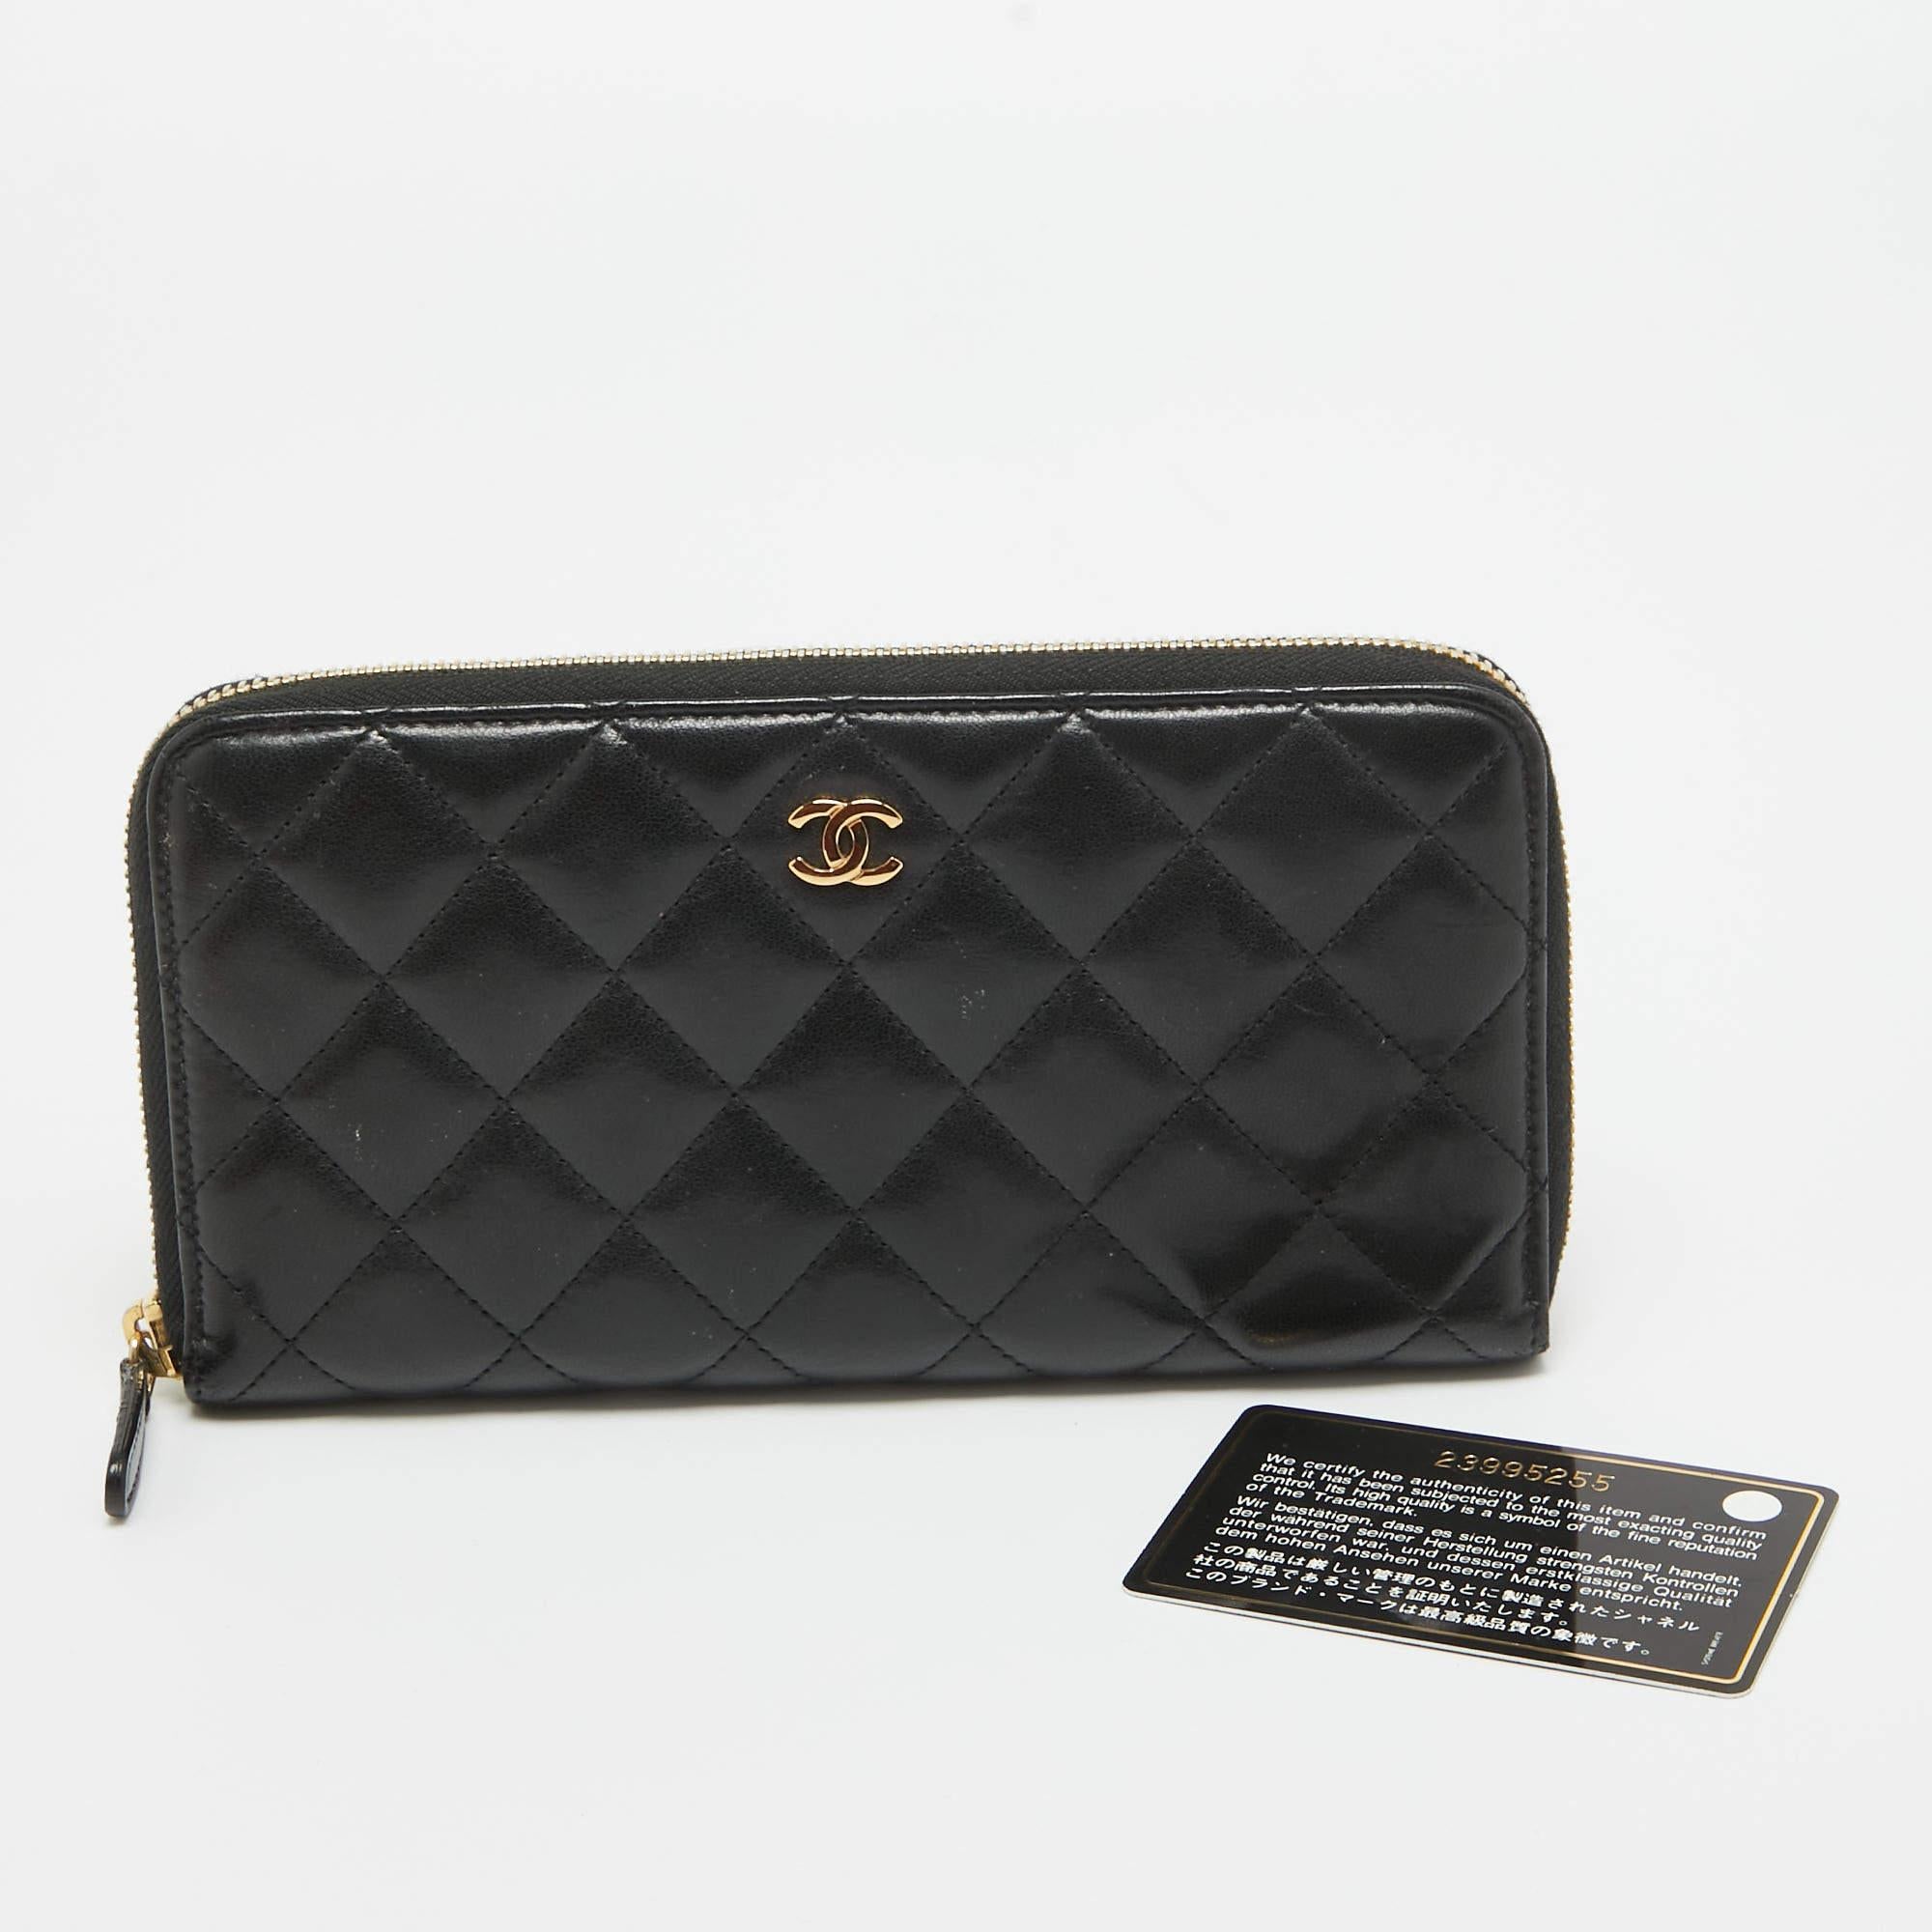 Chanel Black Quilted Leather Classic Zip Around Wallet im Angebot 8